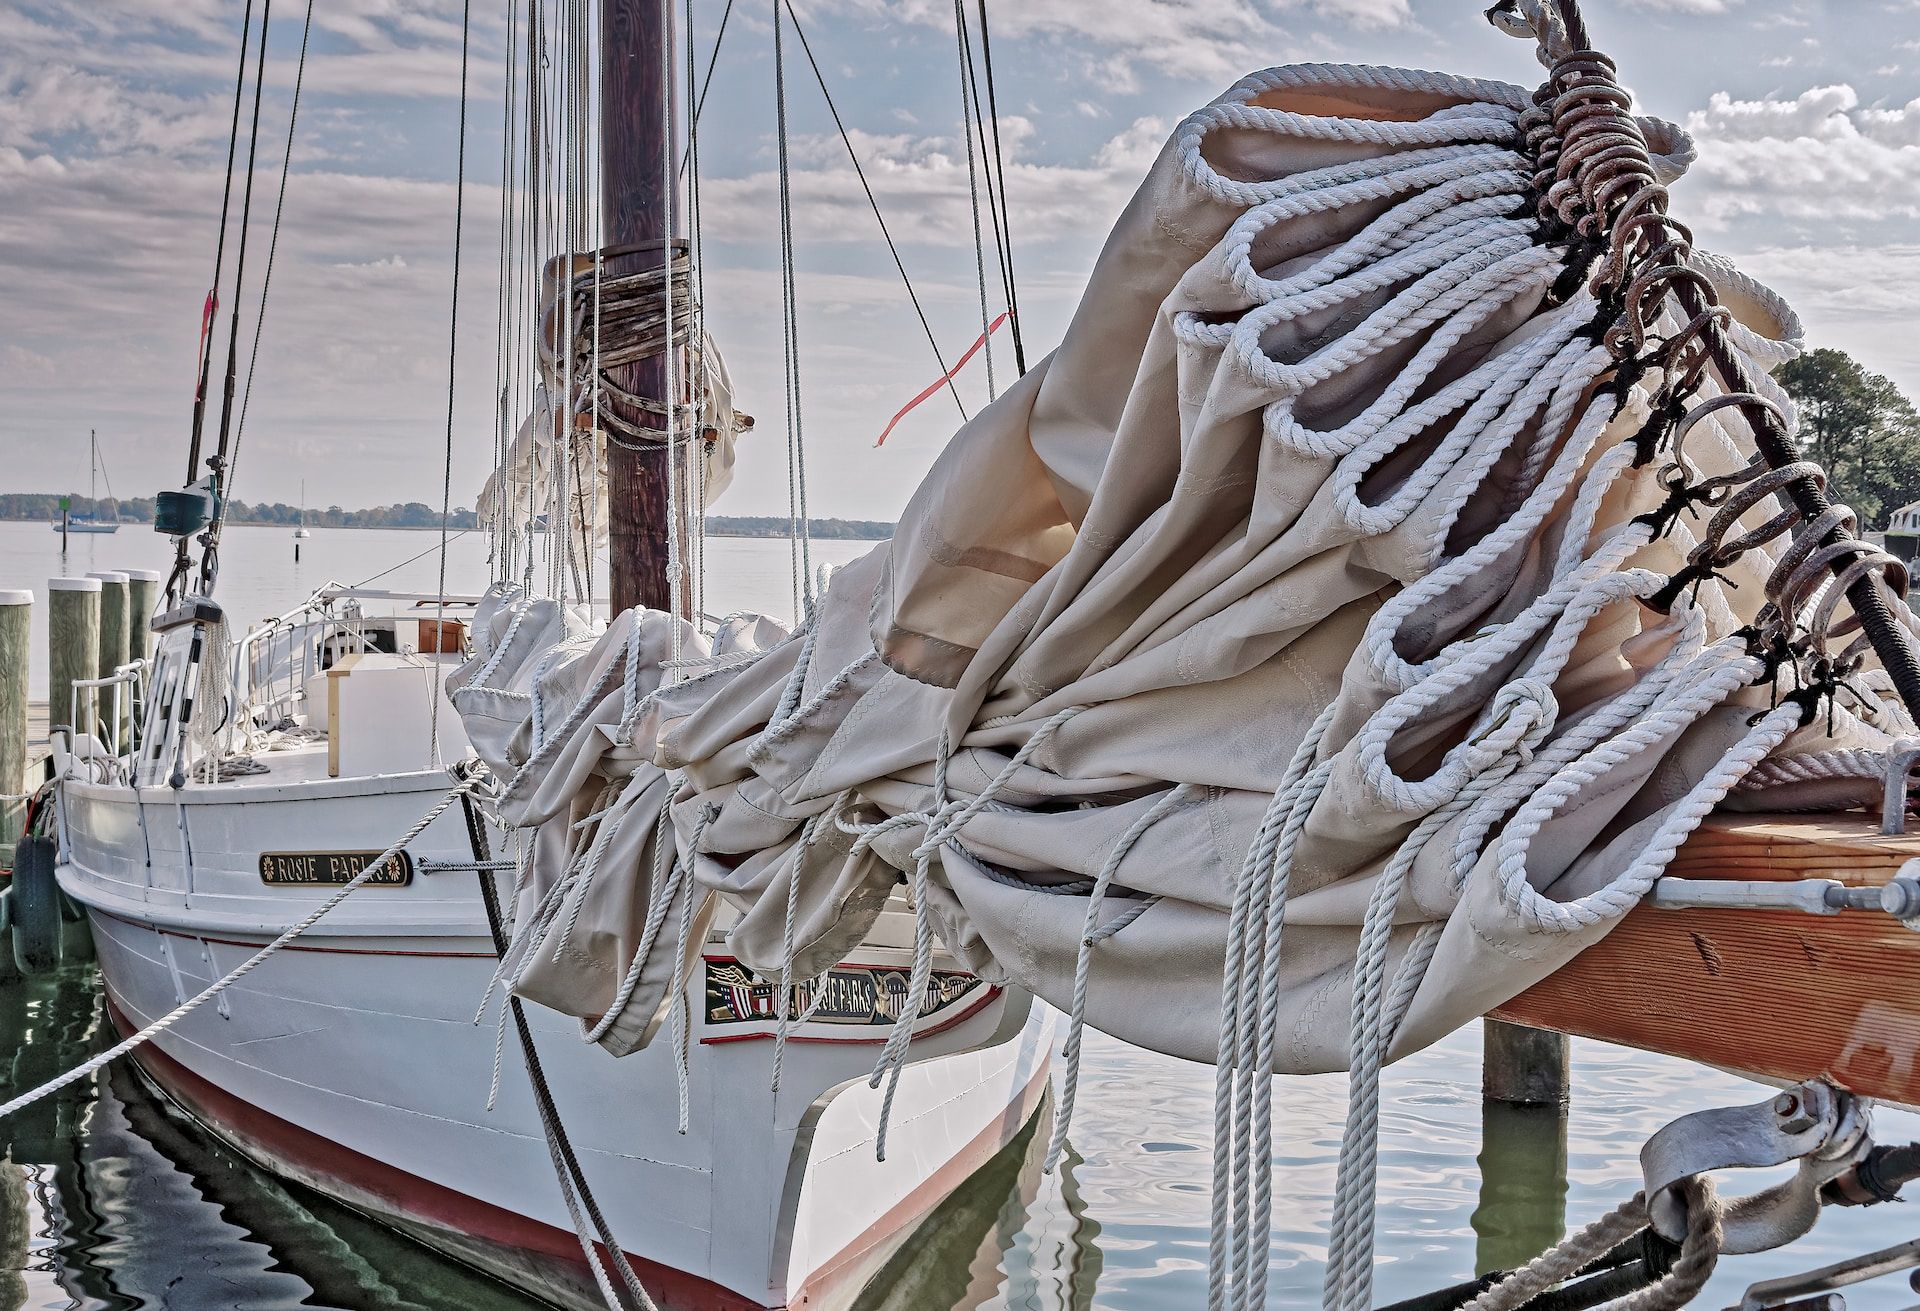 Sailboat docked in St. Michaels, Maryland